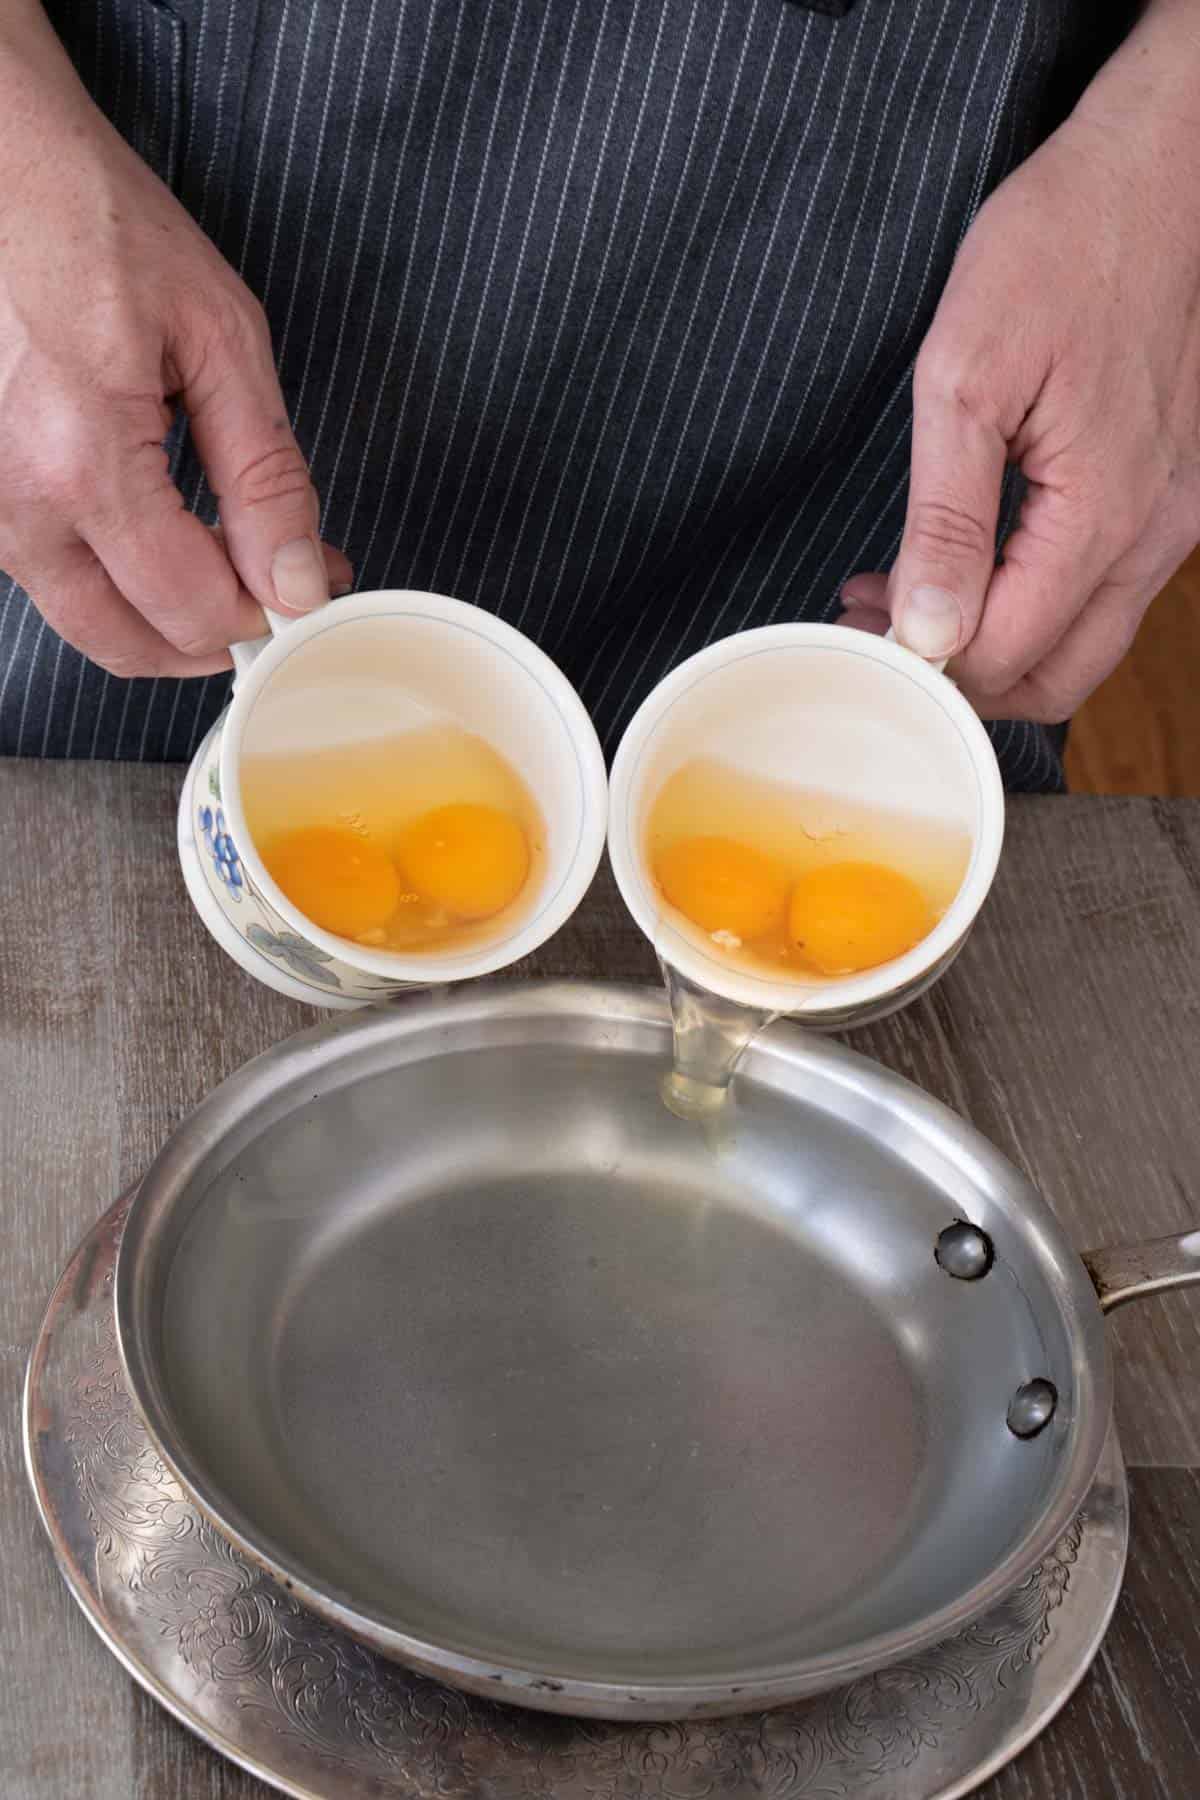 adding eggs to boiling water using teacups